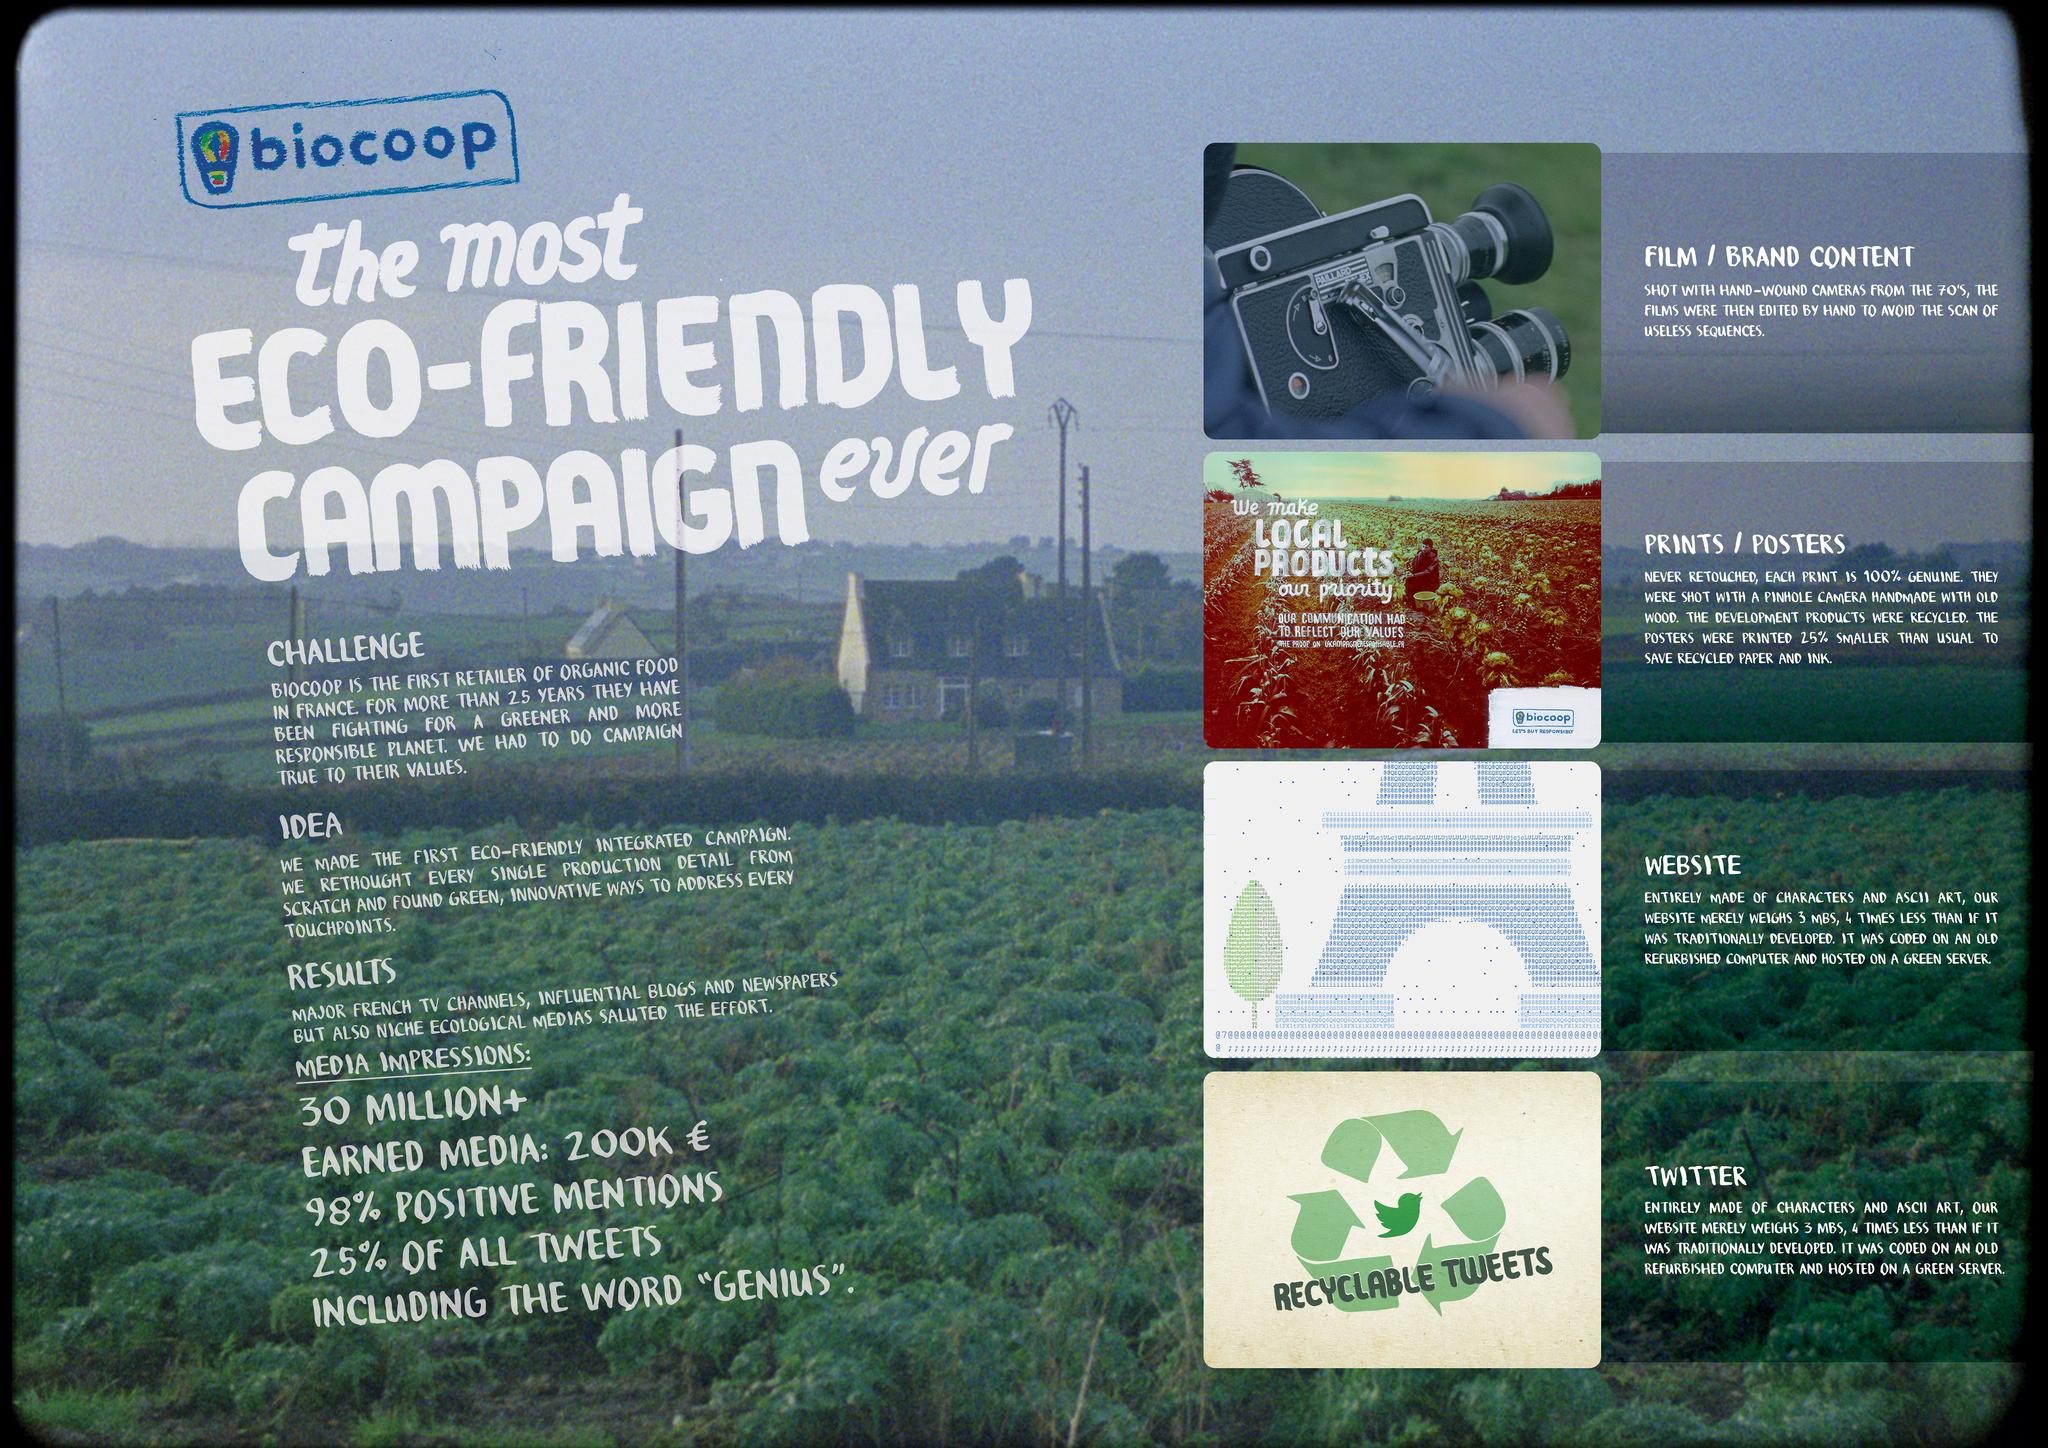 THE MOST ECO-FRIENDLY CAMPAIGN EVER